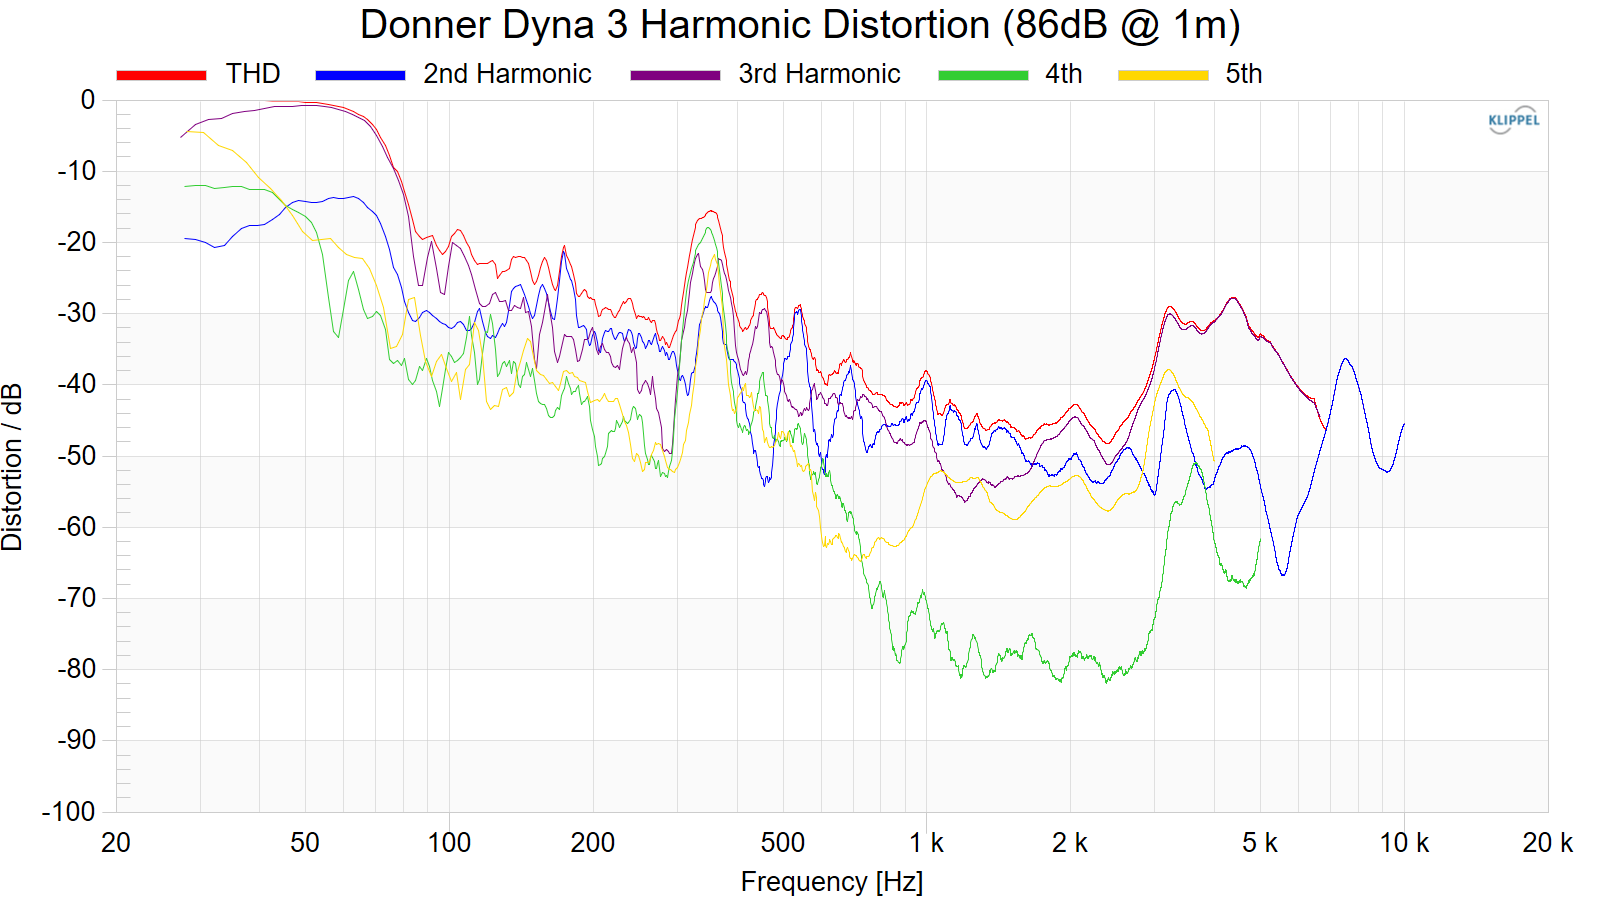 Donner%20Dyna%203%20Harmonic%20Distortion%20%2886dB%20%40%201m%29.png